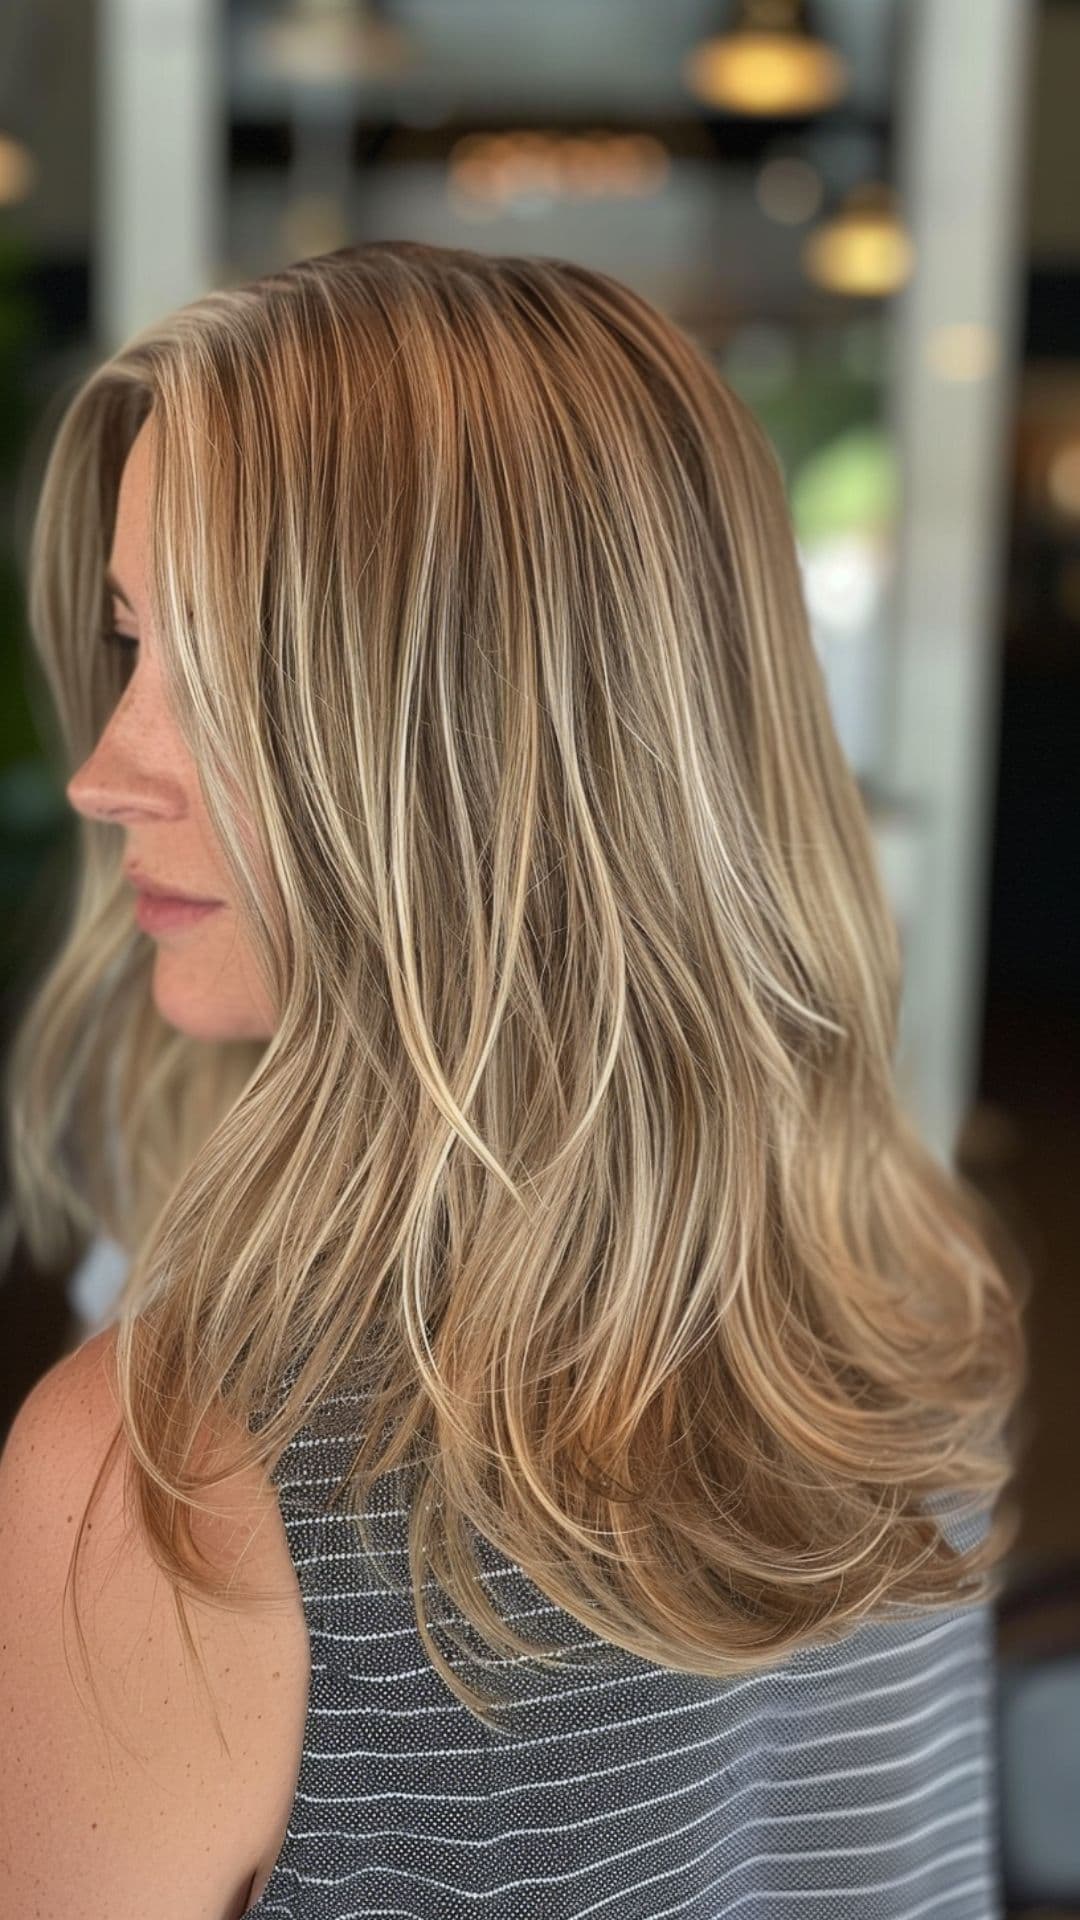 A woman modelling a subtle blonde highlights.